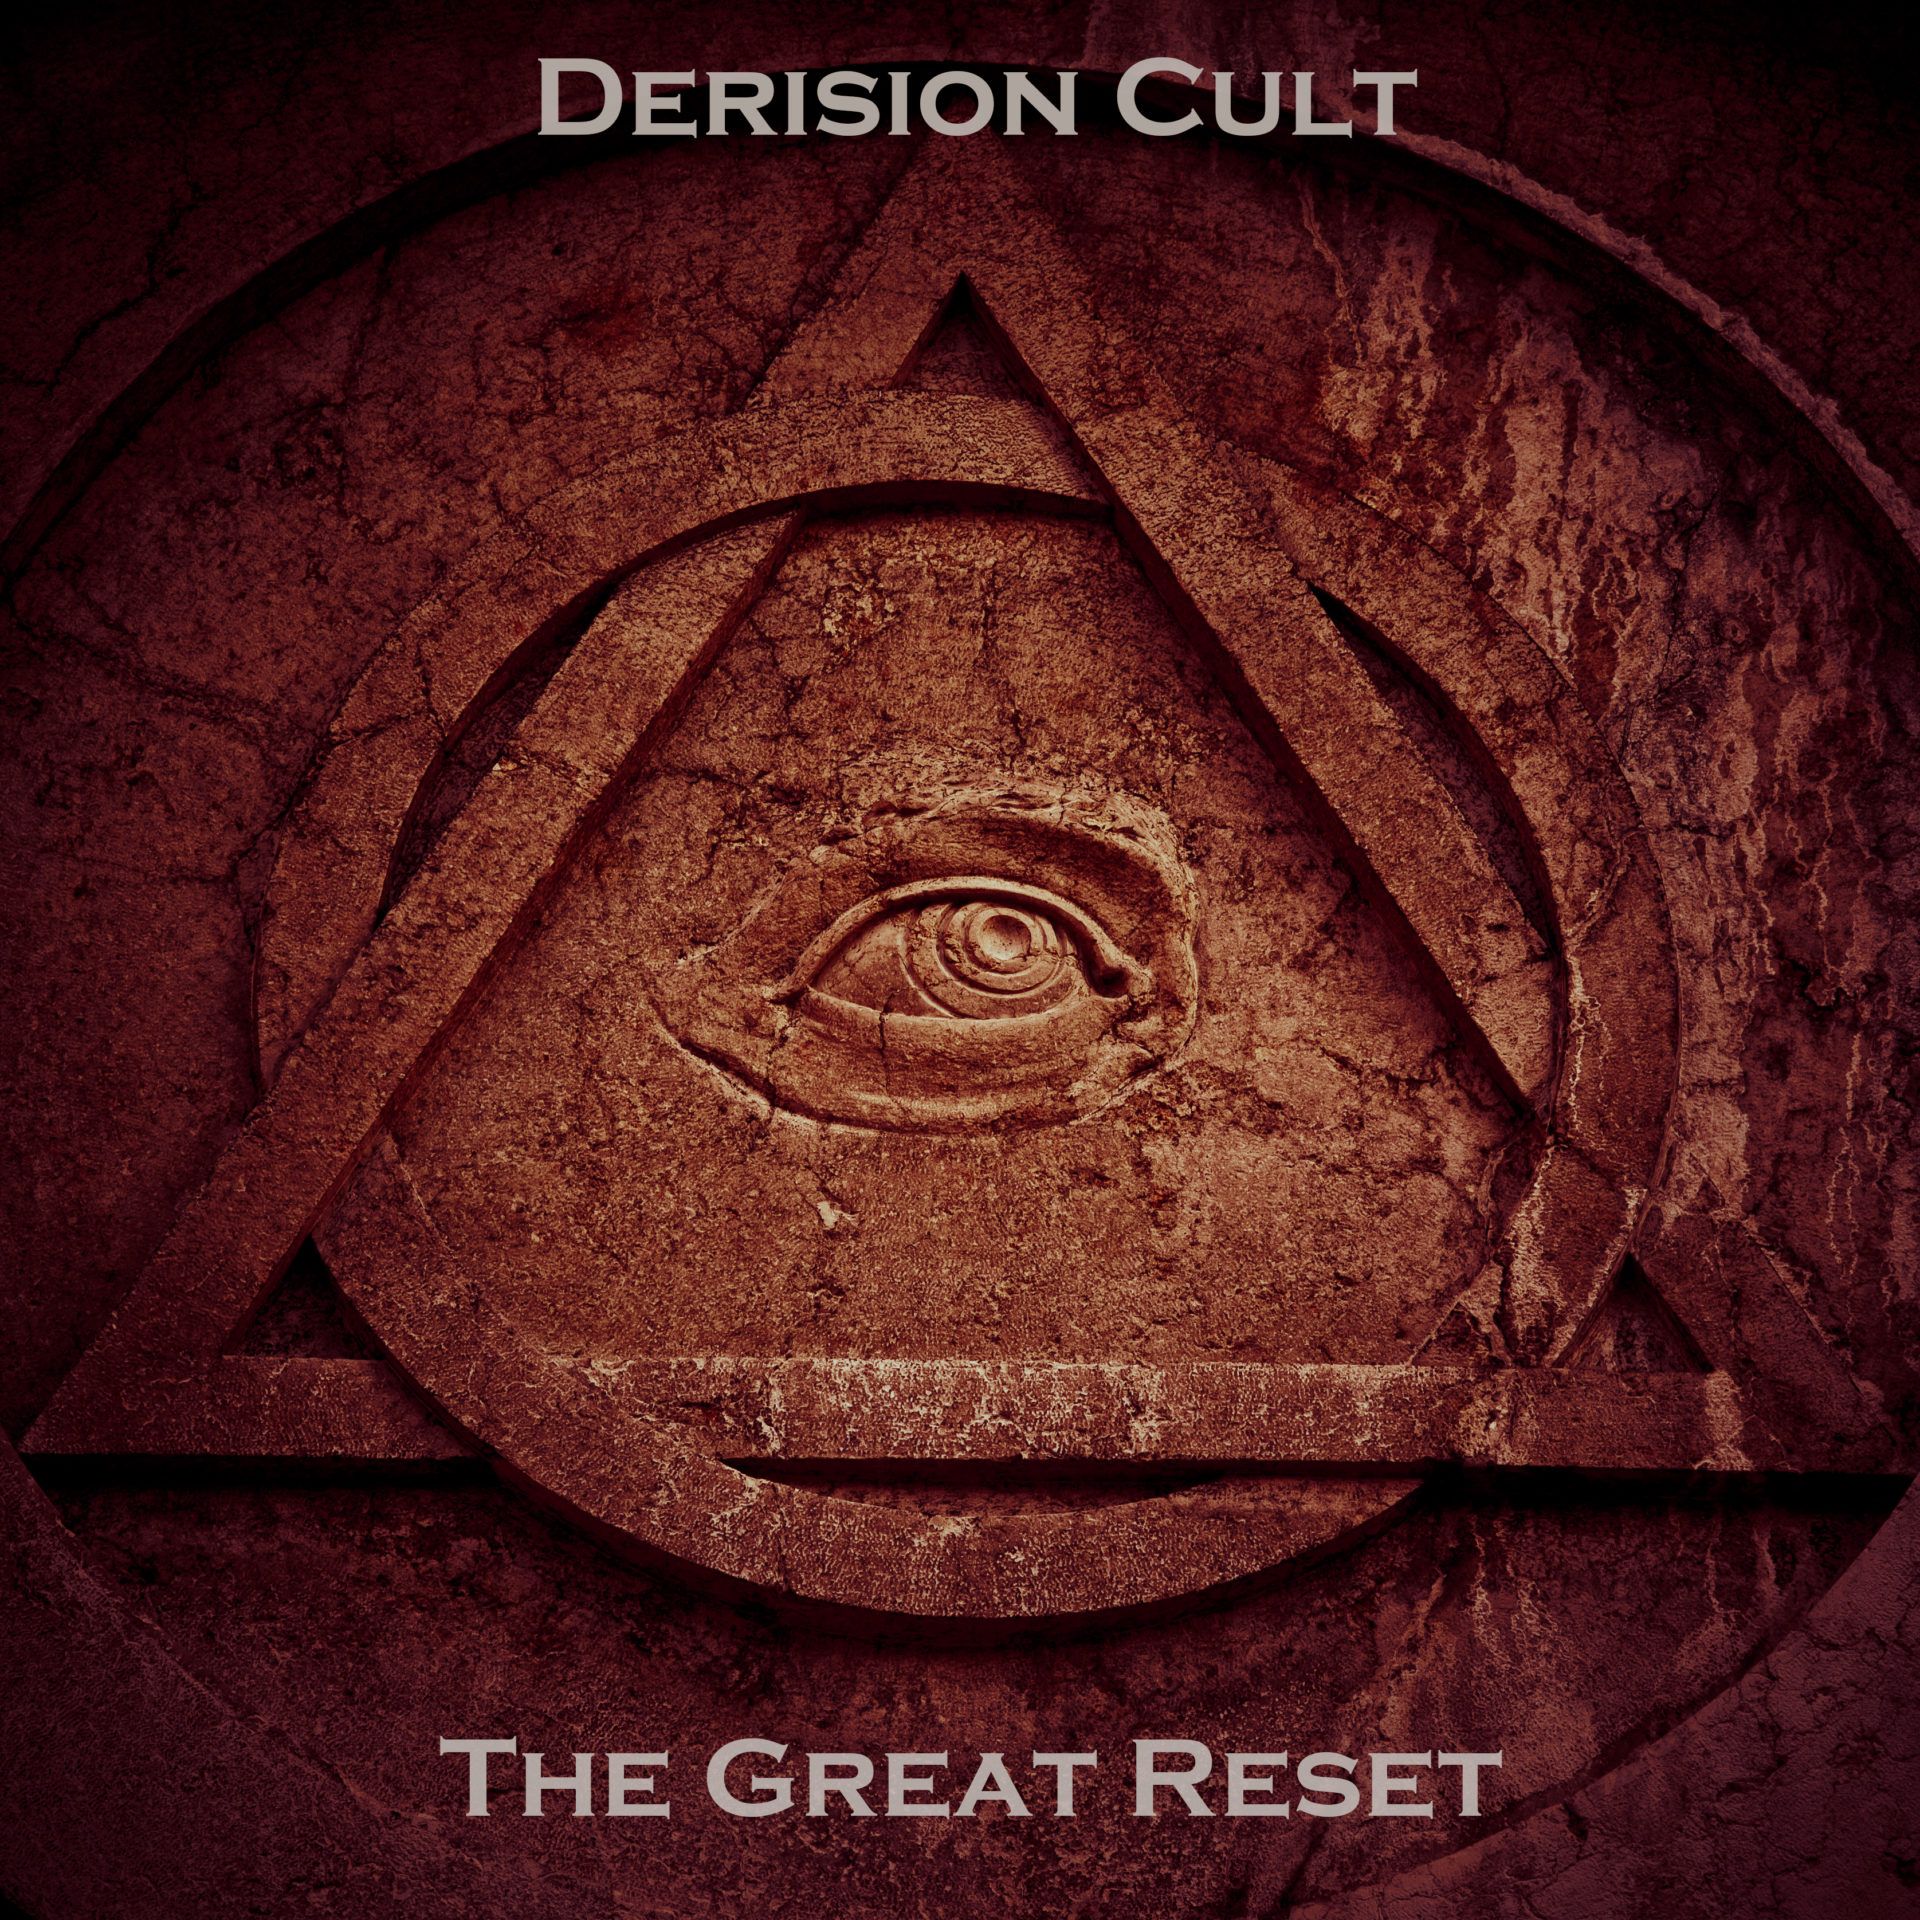 Derision Cult (ebm/industrial) “The Great Reset”